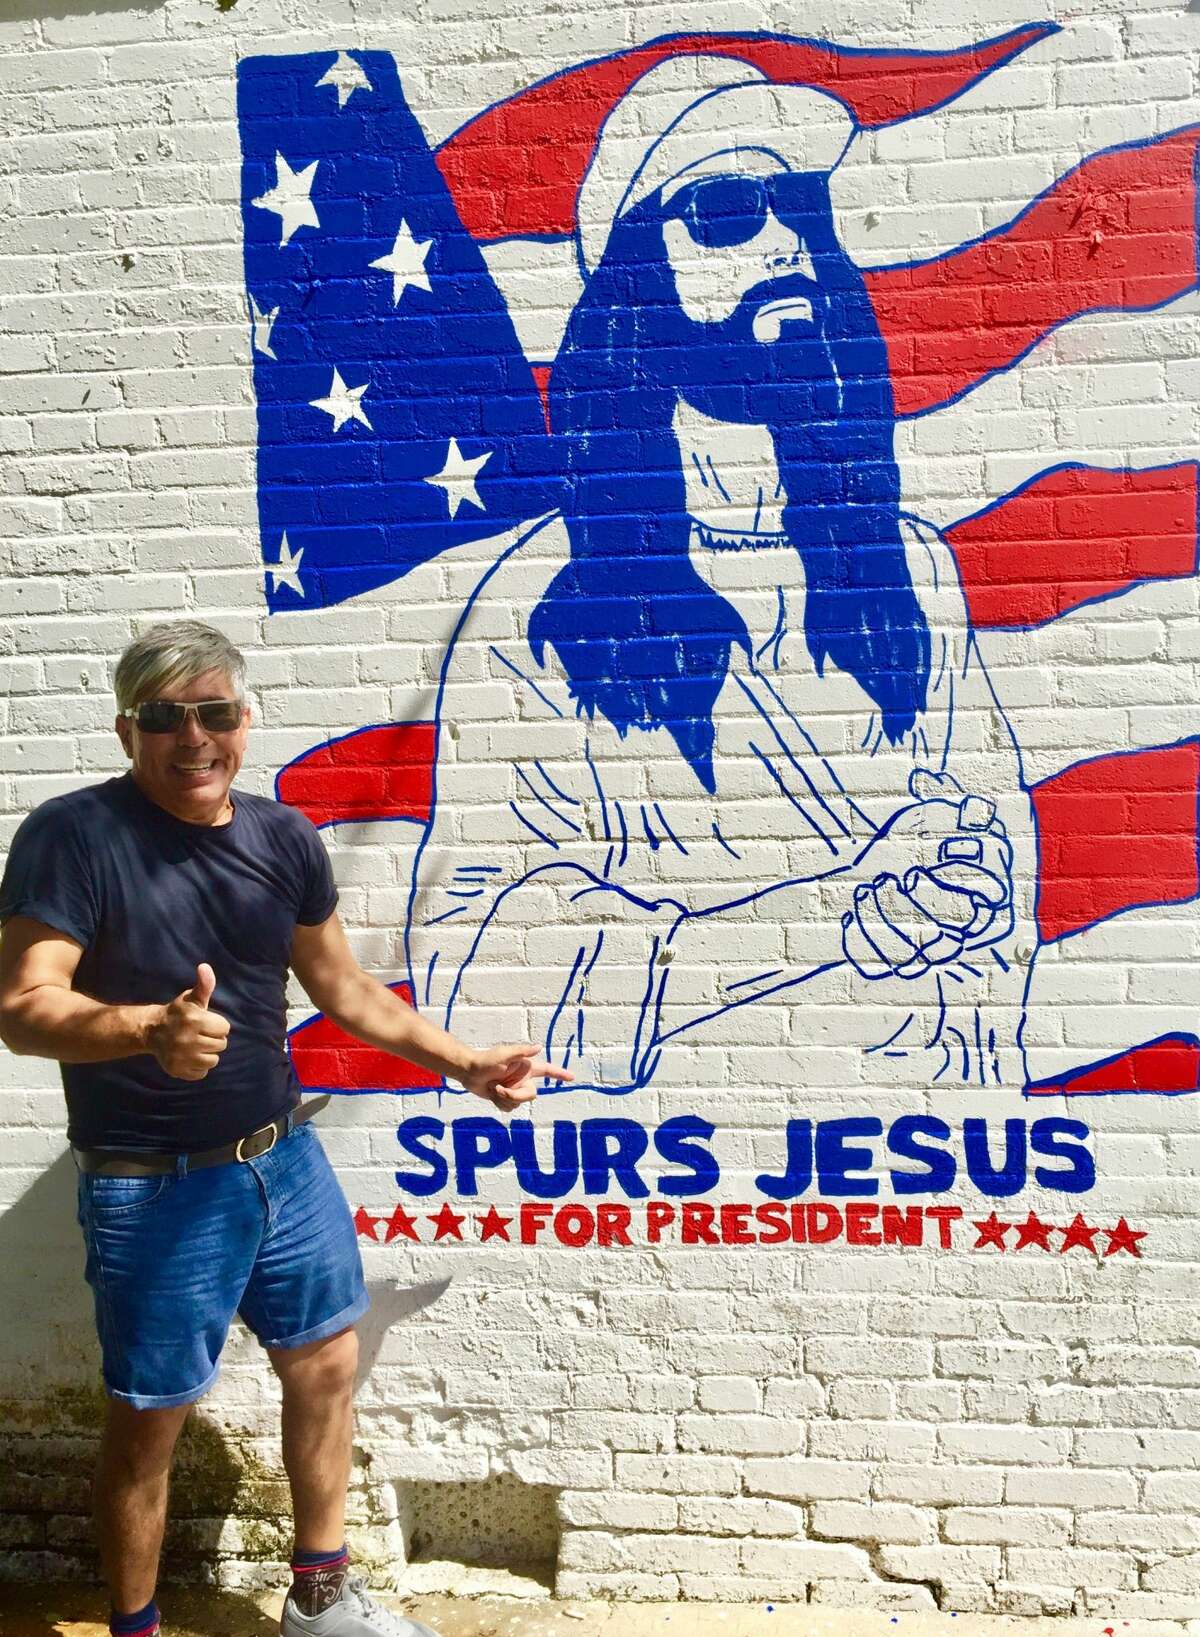 Instagram will soon be blessed with San Antonio's latest piece of photo opportunity art, a mural of — and by — Spurs Jesus, on the exterior wall of Tito's Mexican Restaurant.